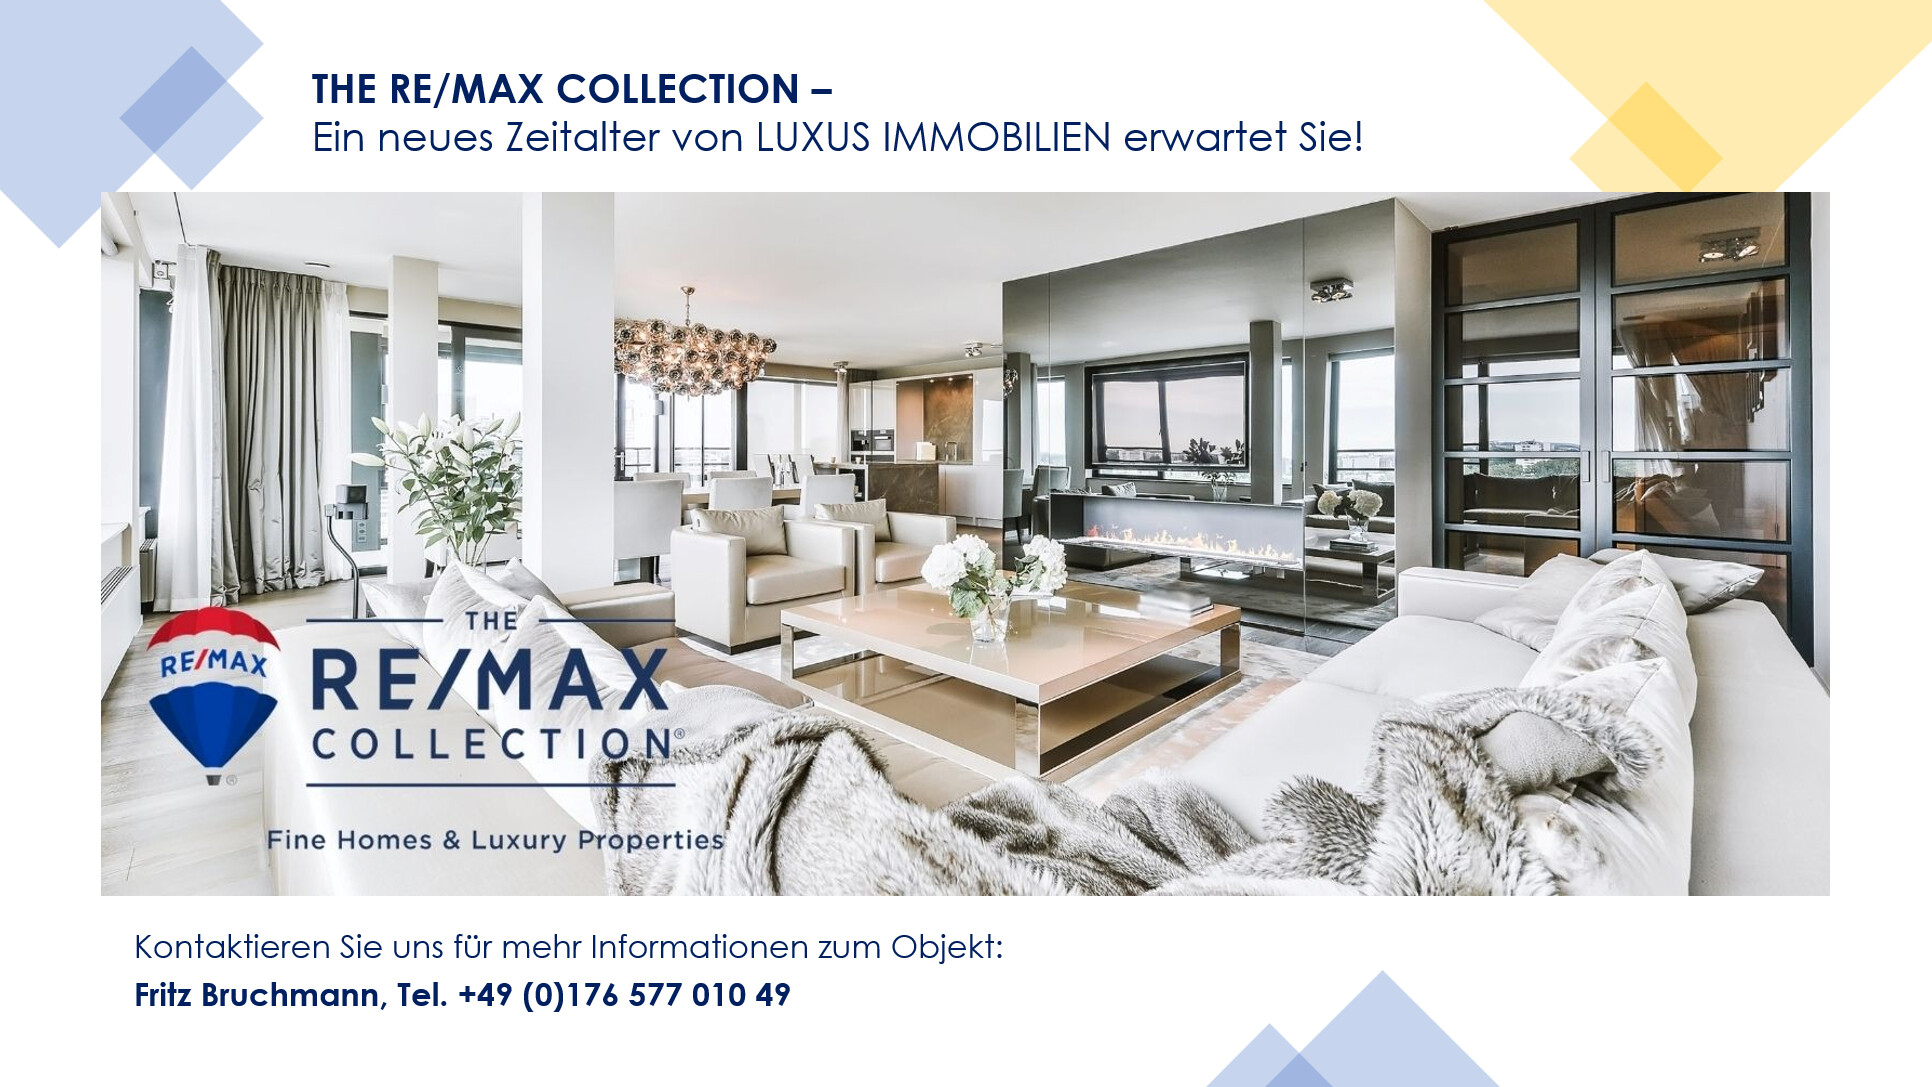 REMAX IMMOBILIEN_THE LUXURY COLLECTION_2